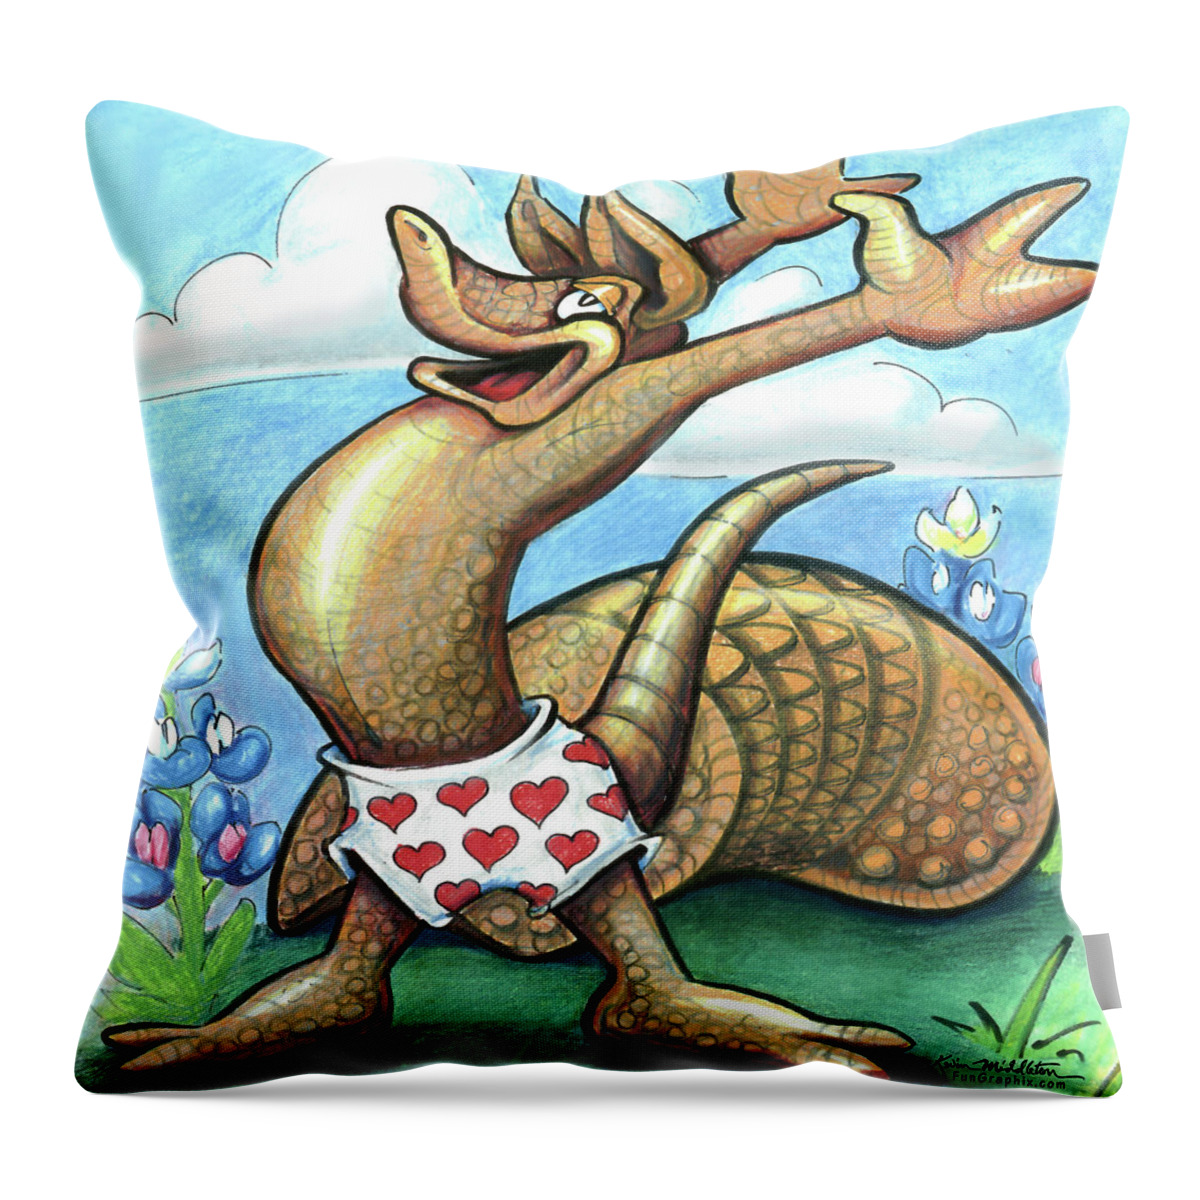 Armadillo Throw Pillow featuring the digital art Get Out of Your Shell, Stop and Smell the Bluebonnets by Kevin Middleton